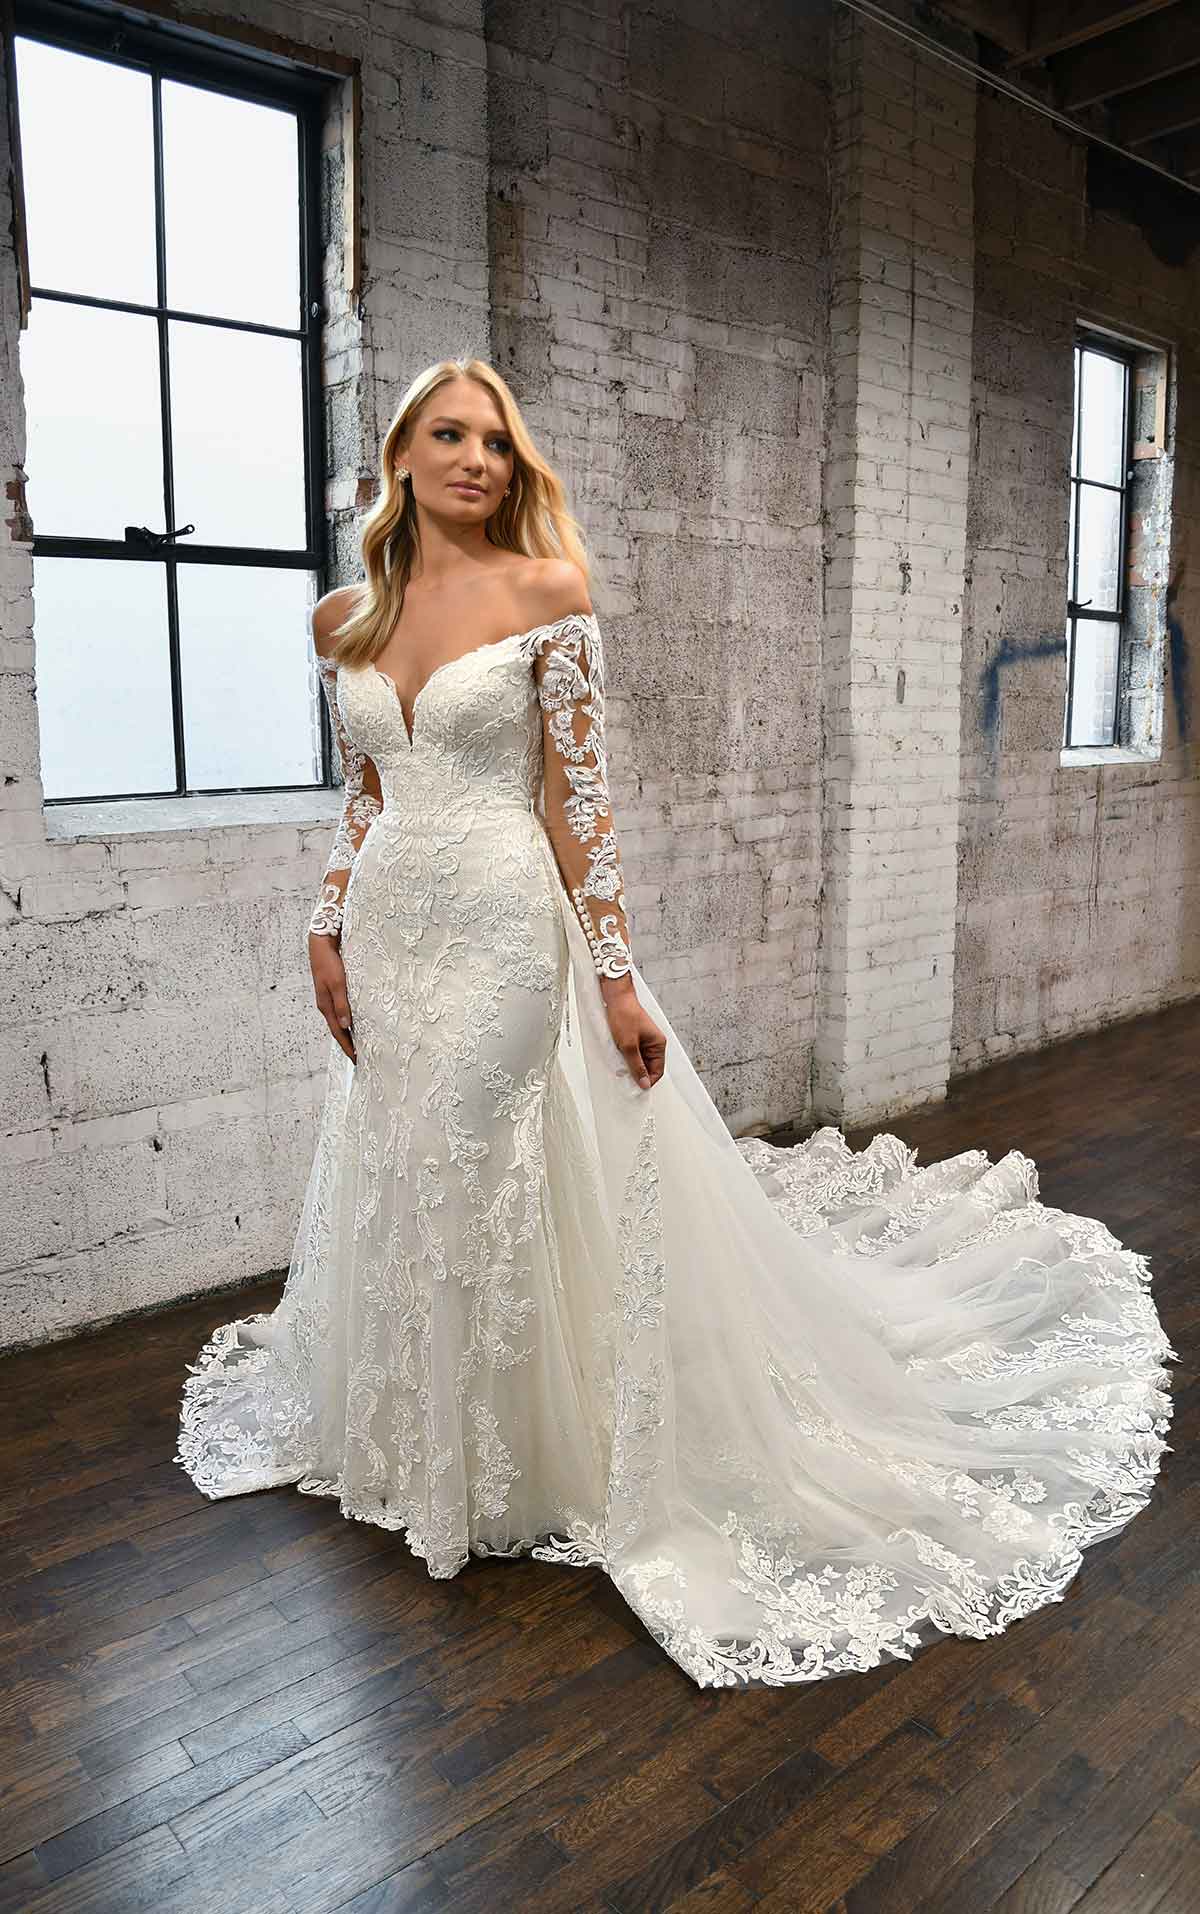 LONG-SLEEVE LACE WEDDING DRESS WITH DETACHABLE OVERSKIRT